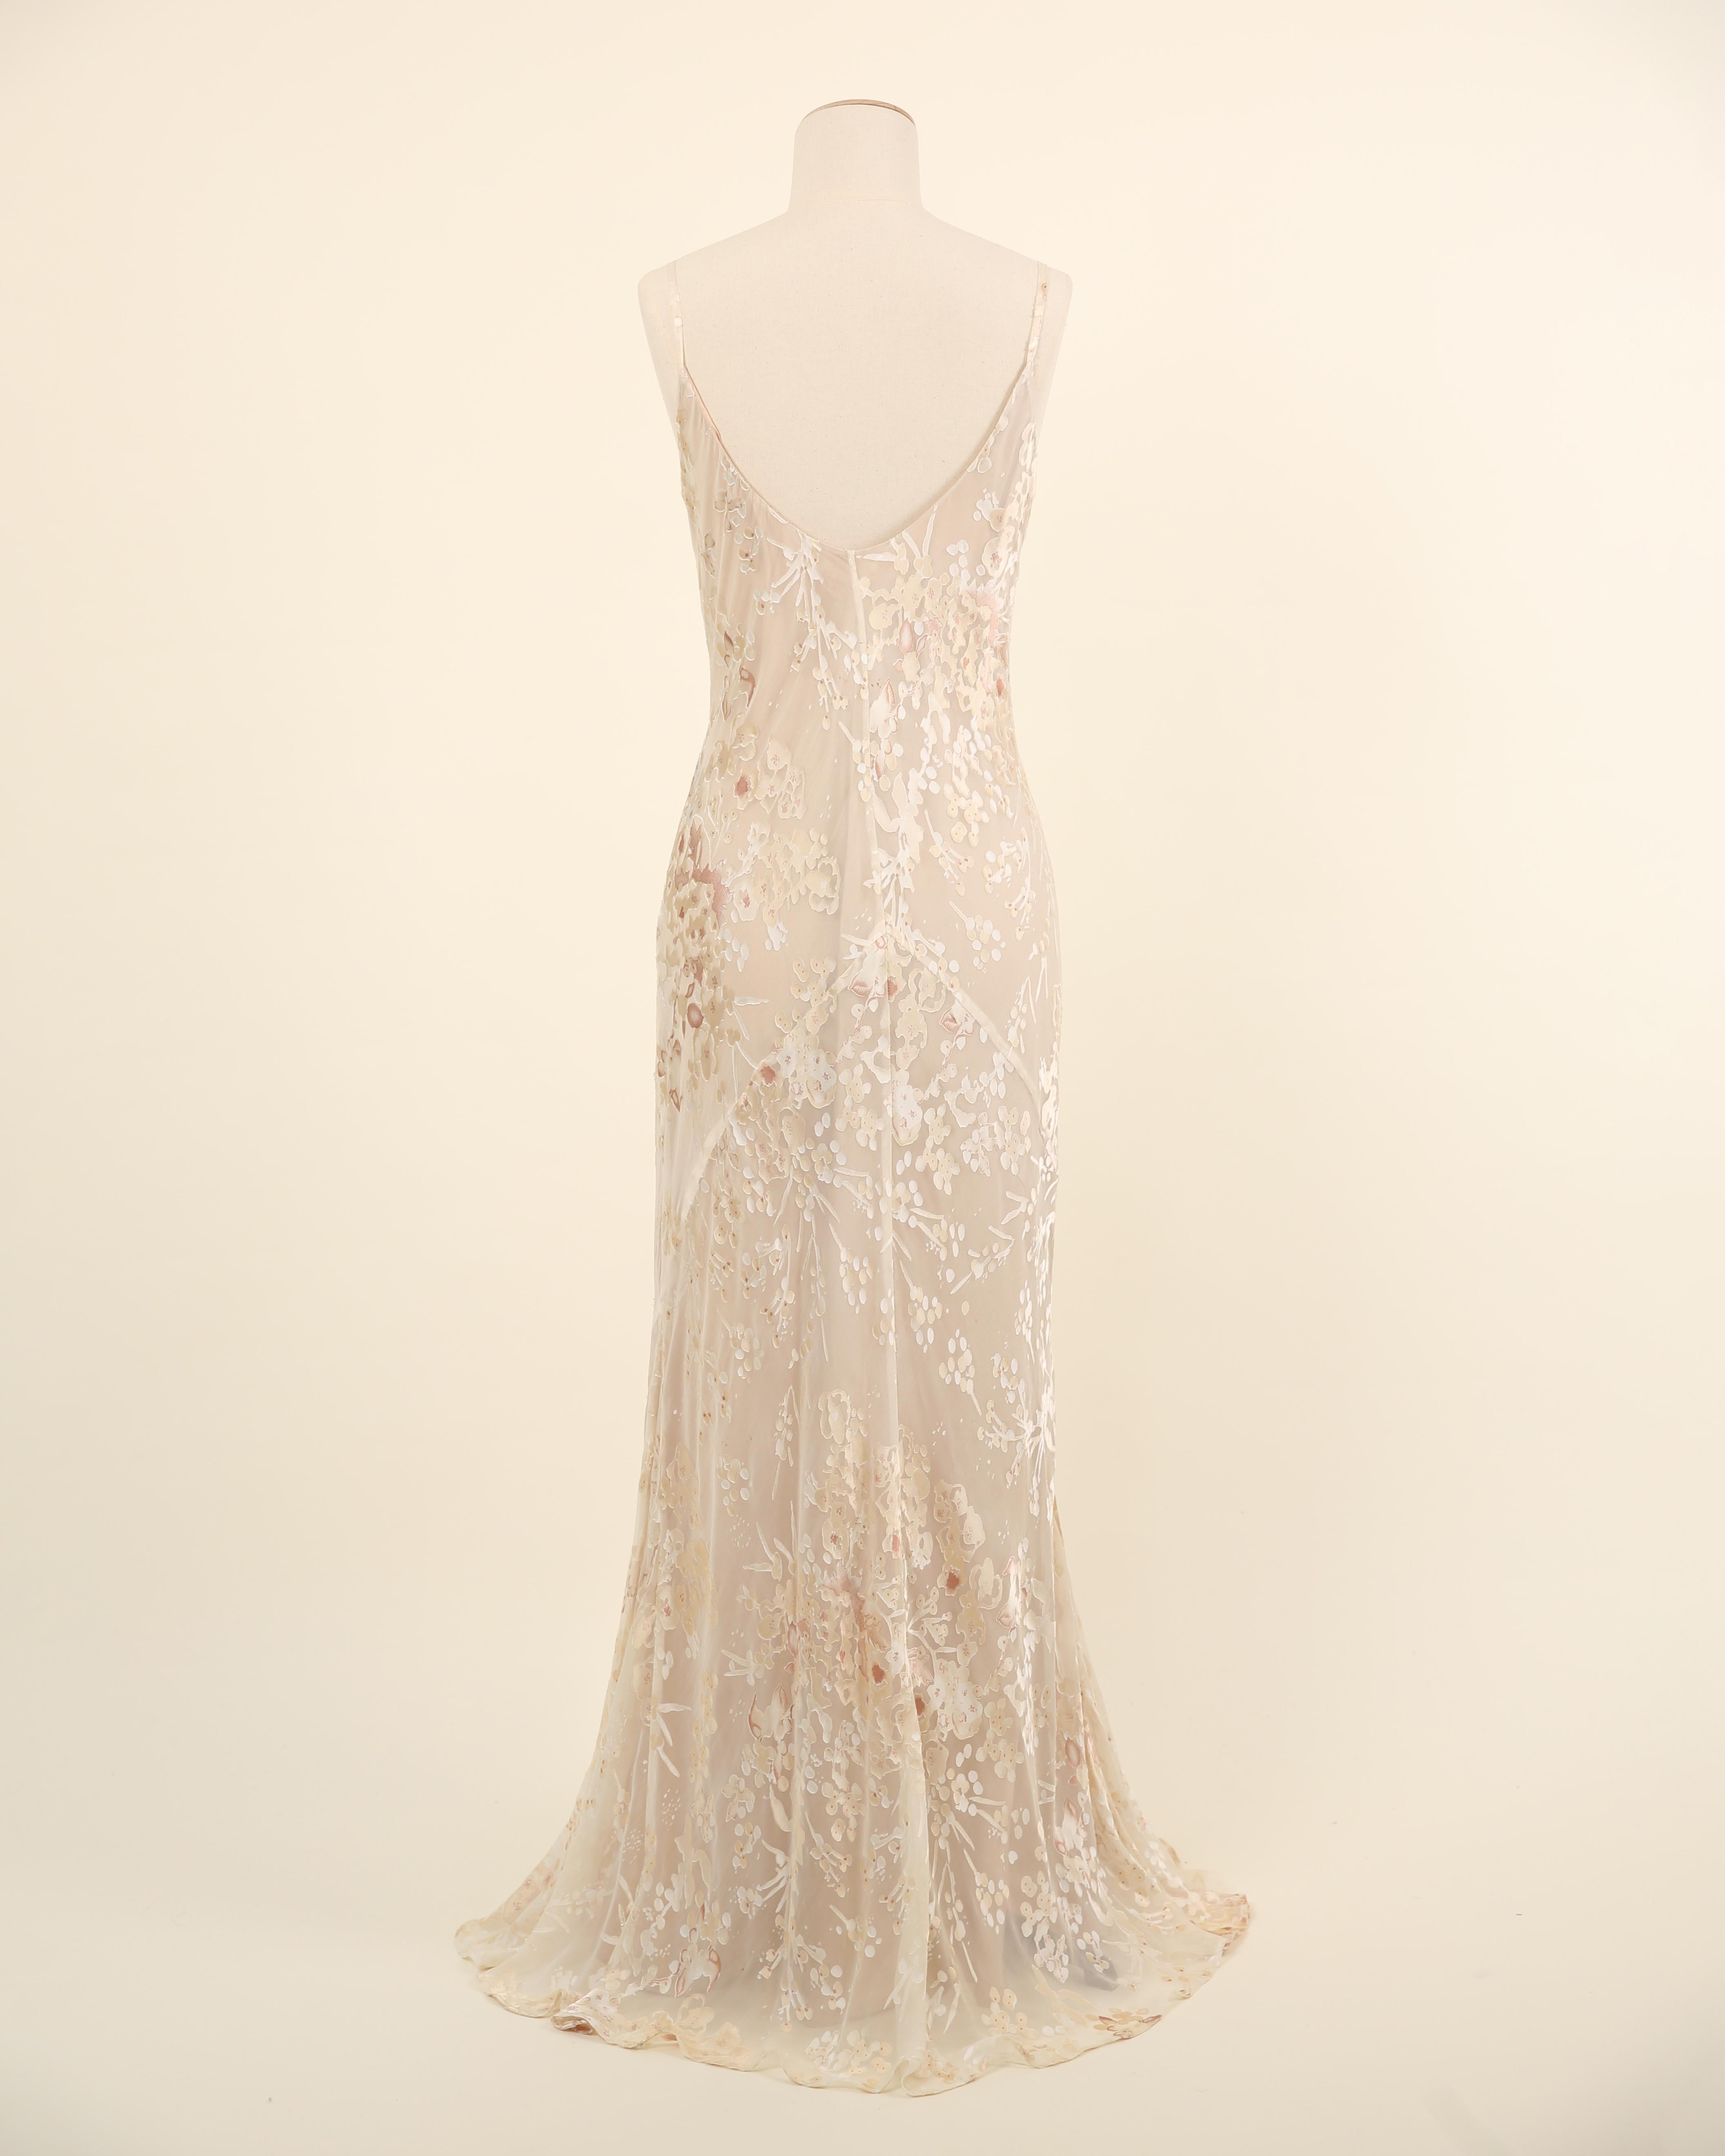 Vintage nude ivory beaded silk sheer floral layered wedding slip dress gown M L 2